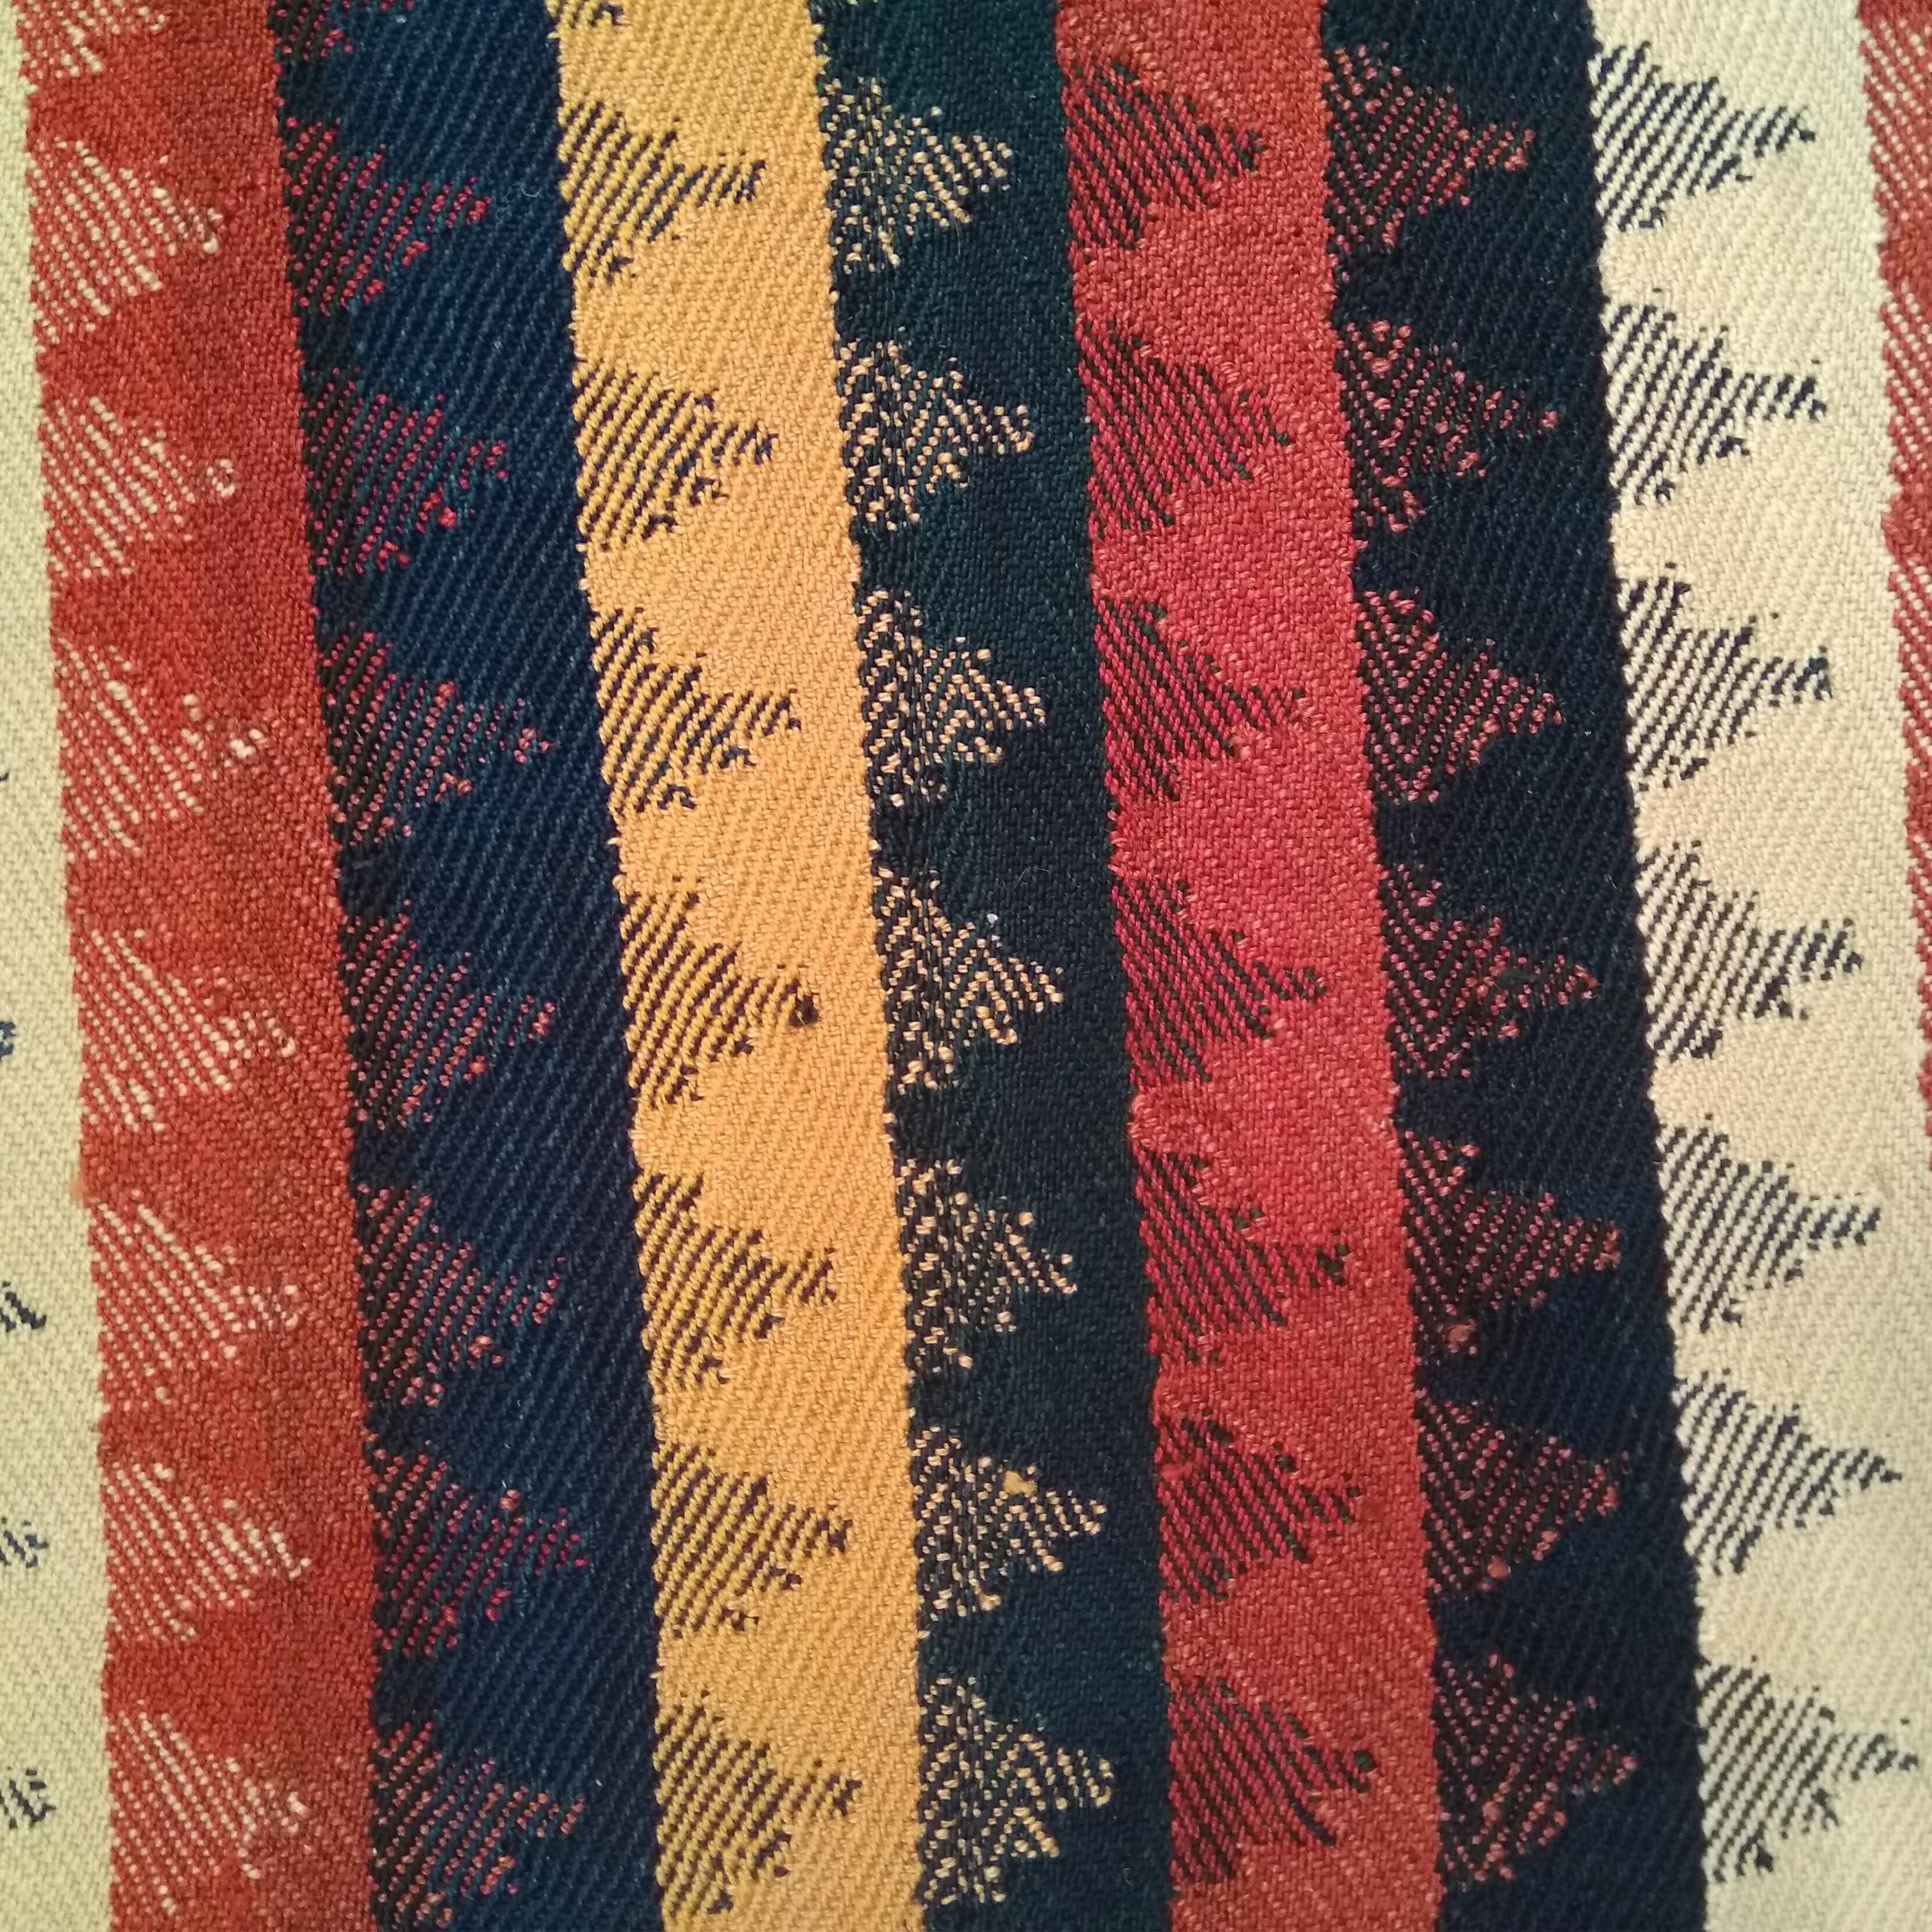 A finely woven wool flat-weave from the Azeri tribe in Armenia, located in the southern Caucasus, distinguished by a tartan-like composition of polychrome vertical bands with a zig-zag contour. This type of effect is achieved through a complex plain